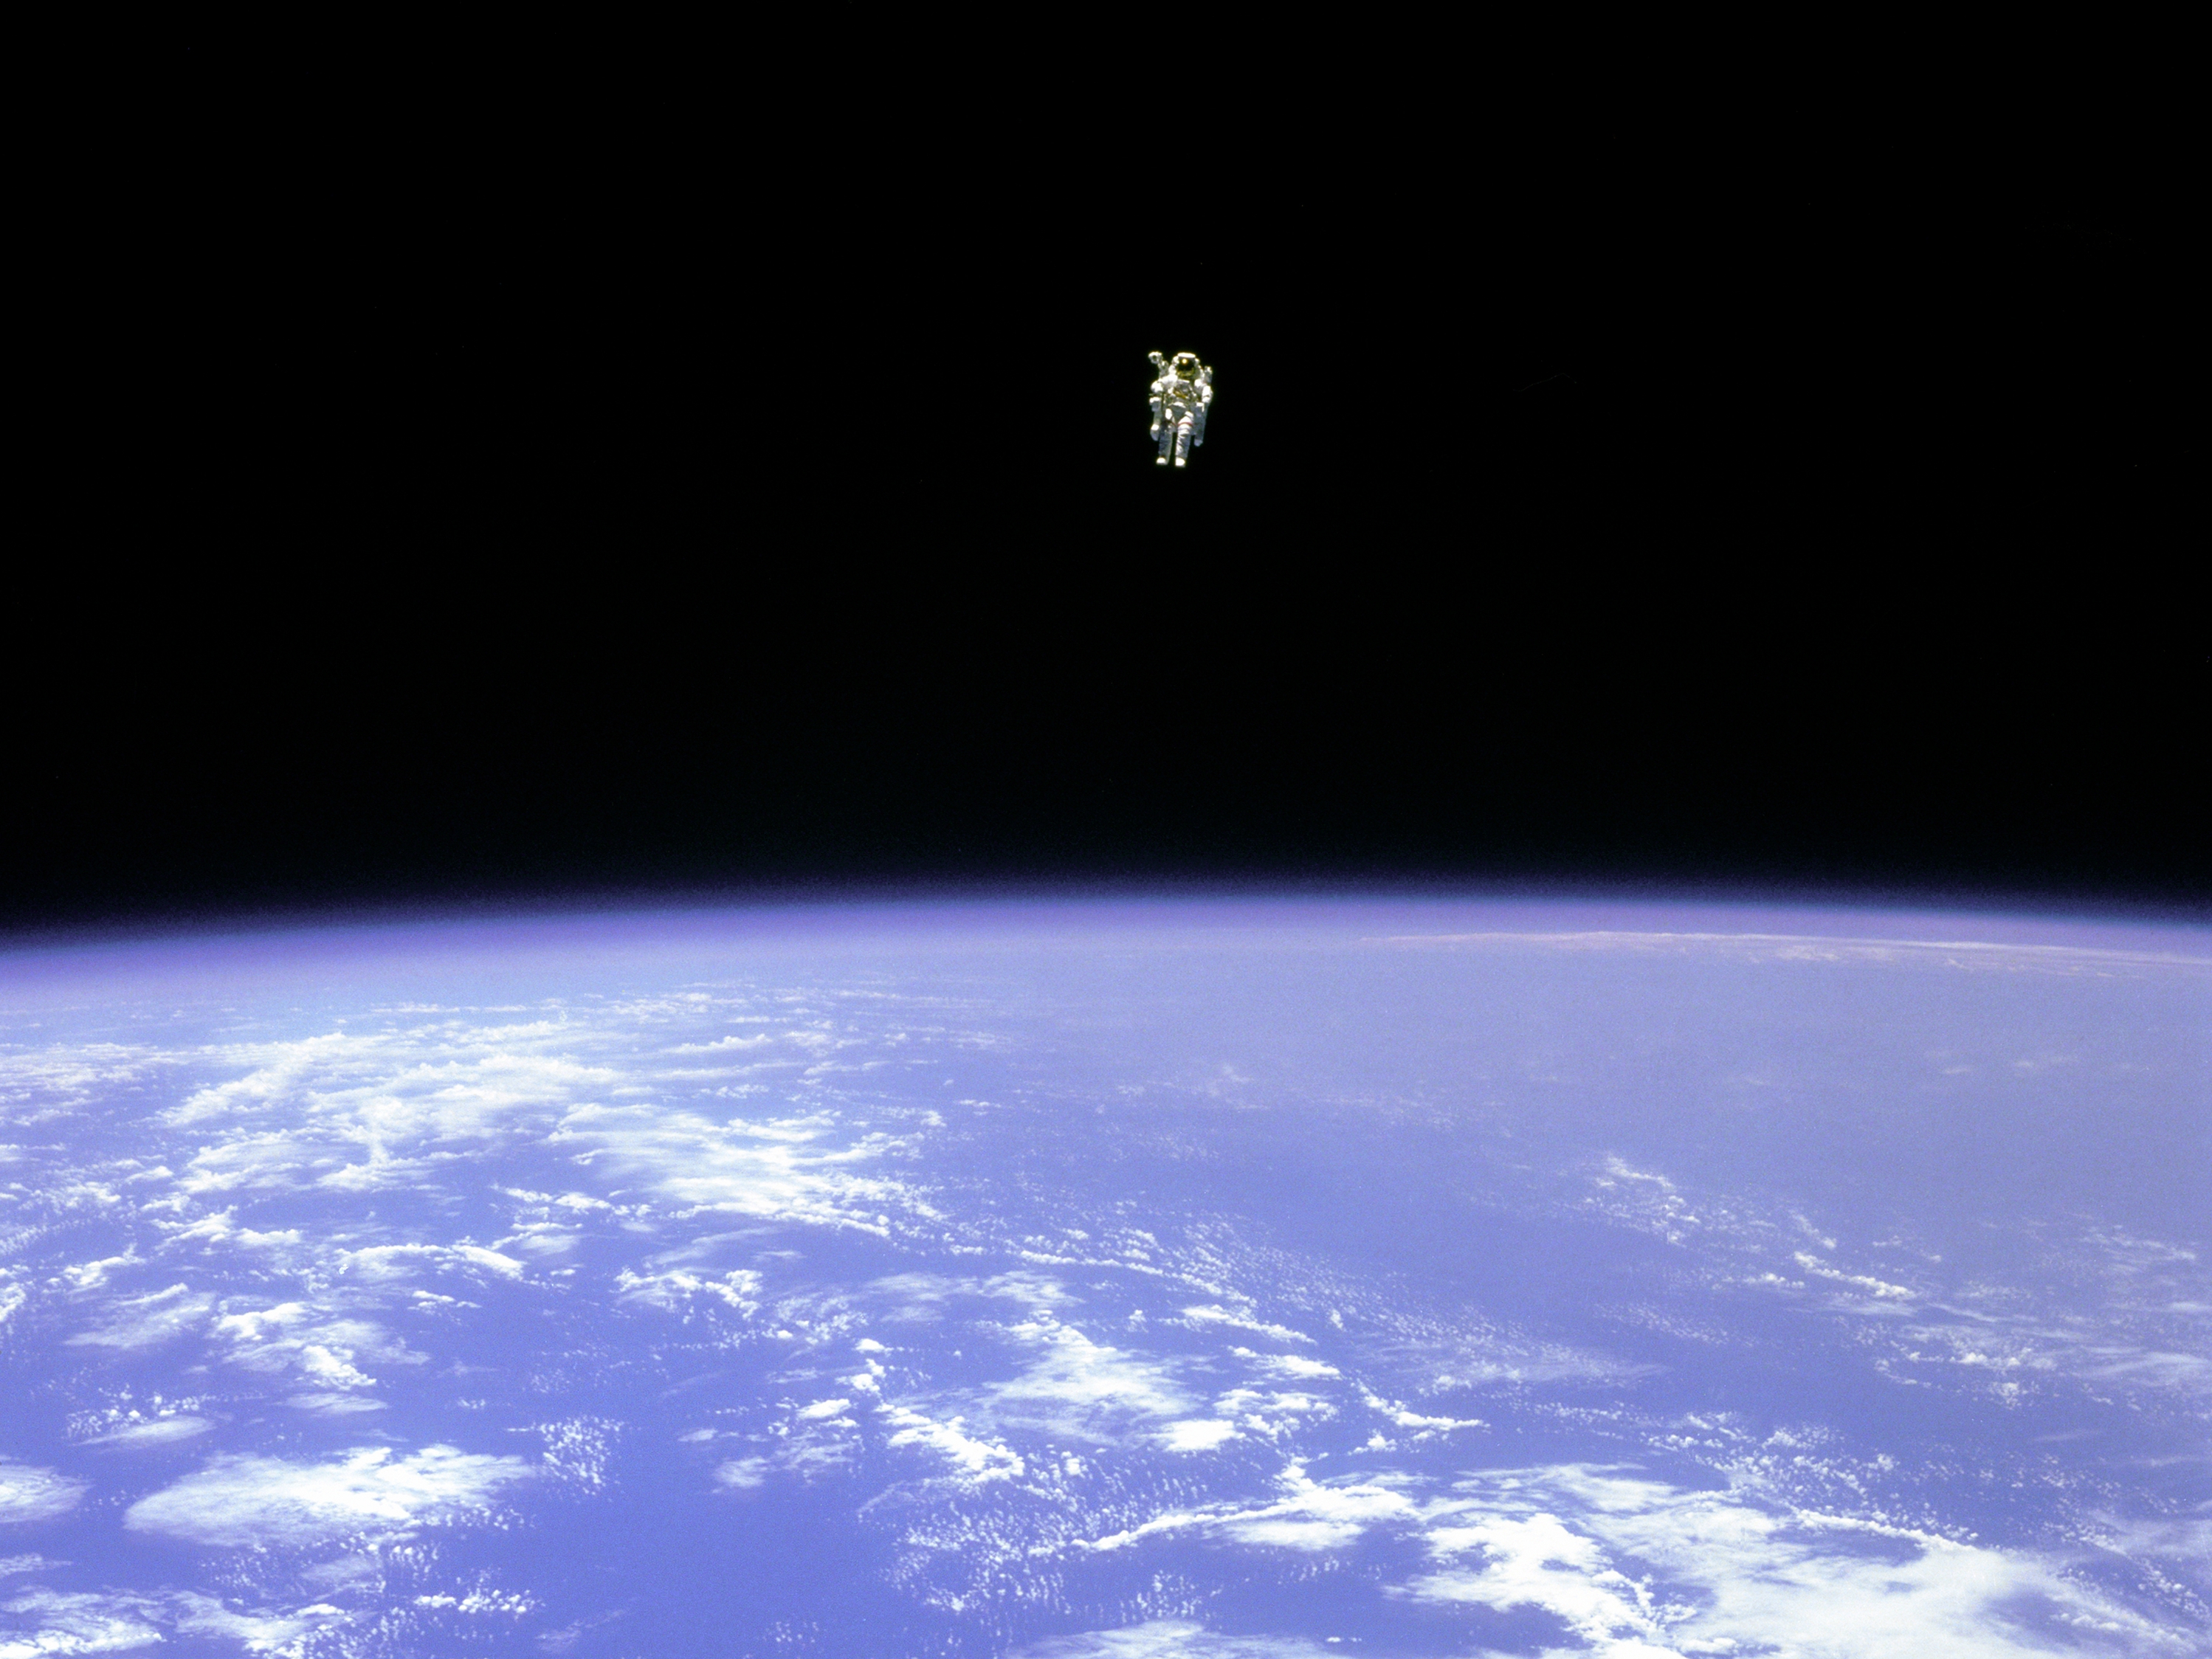 File:Astronaut-in-space.jpg - Wikimedia Commons